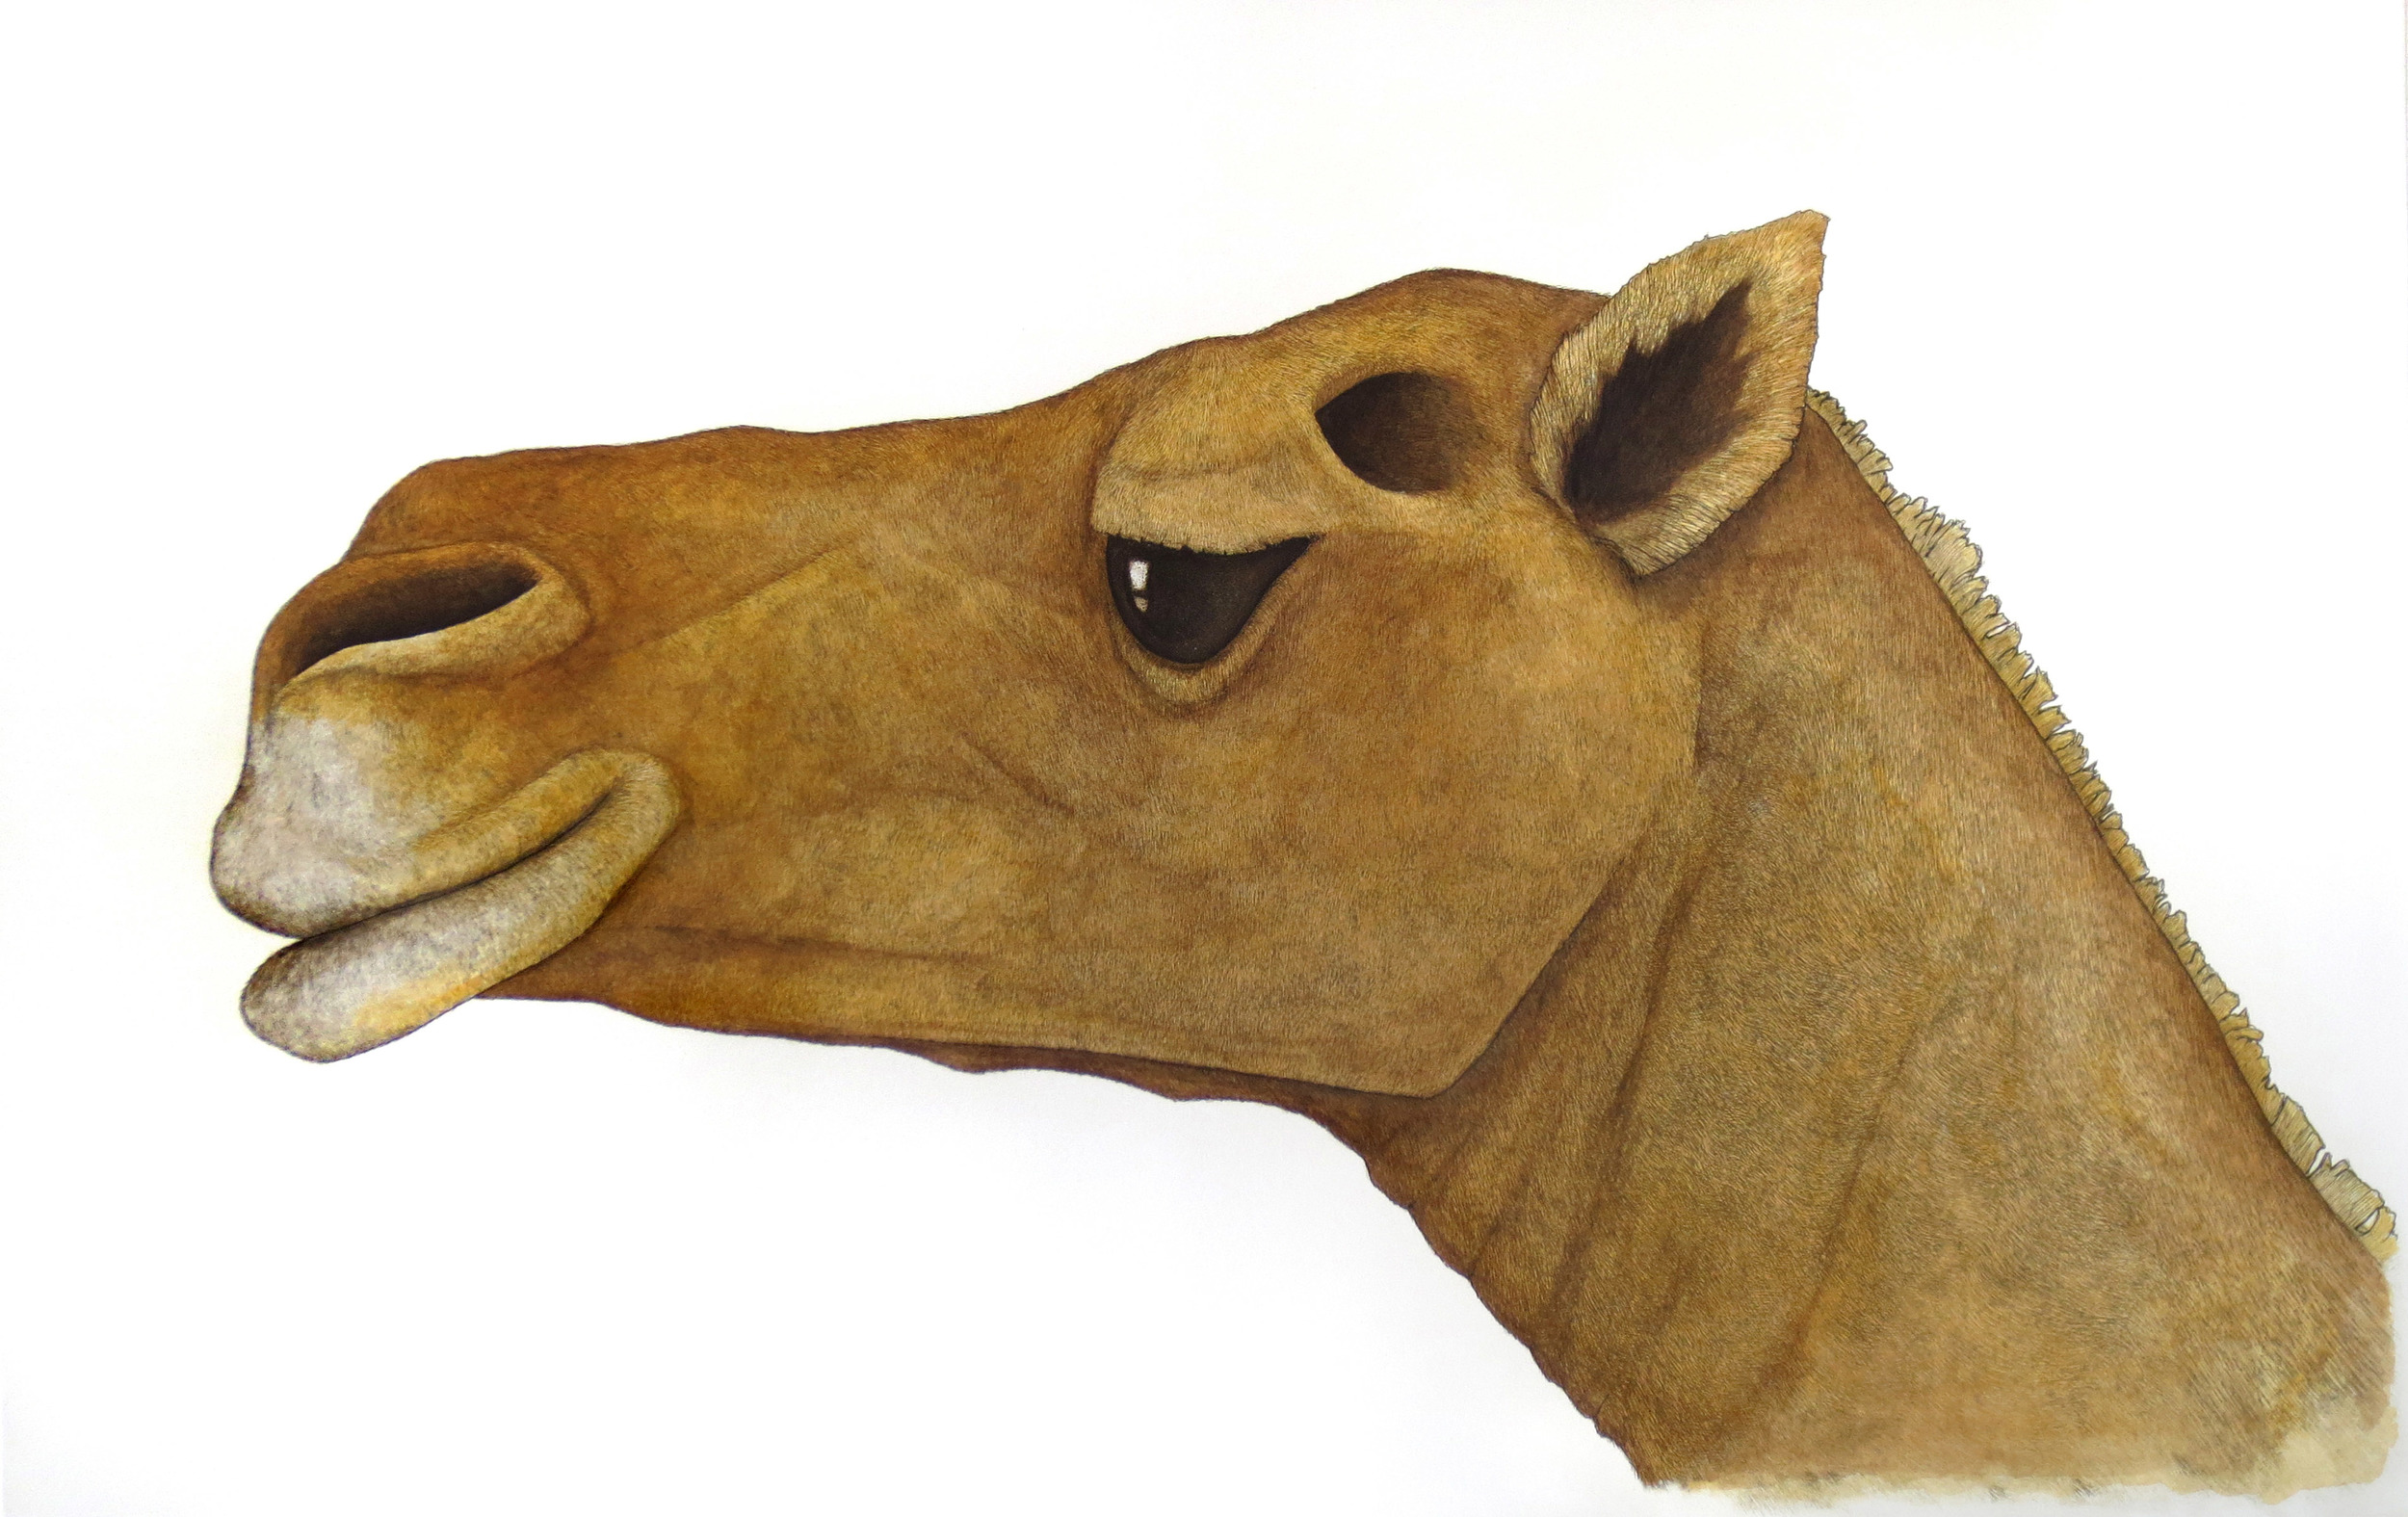 'The Camel'